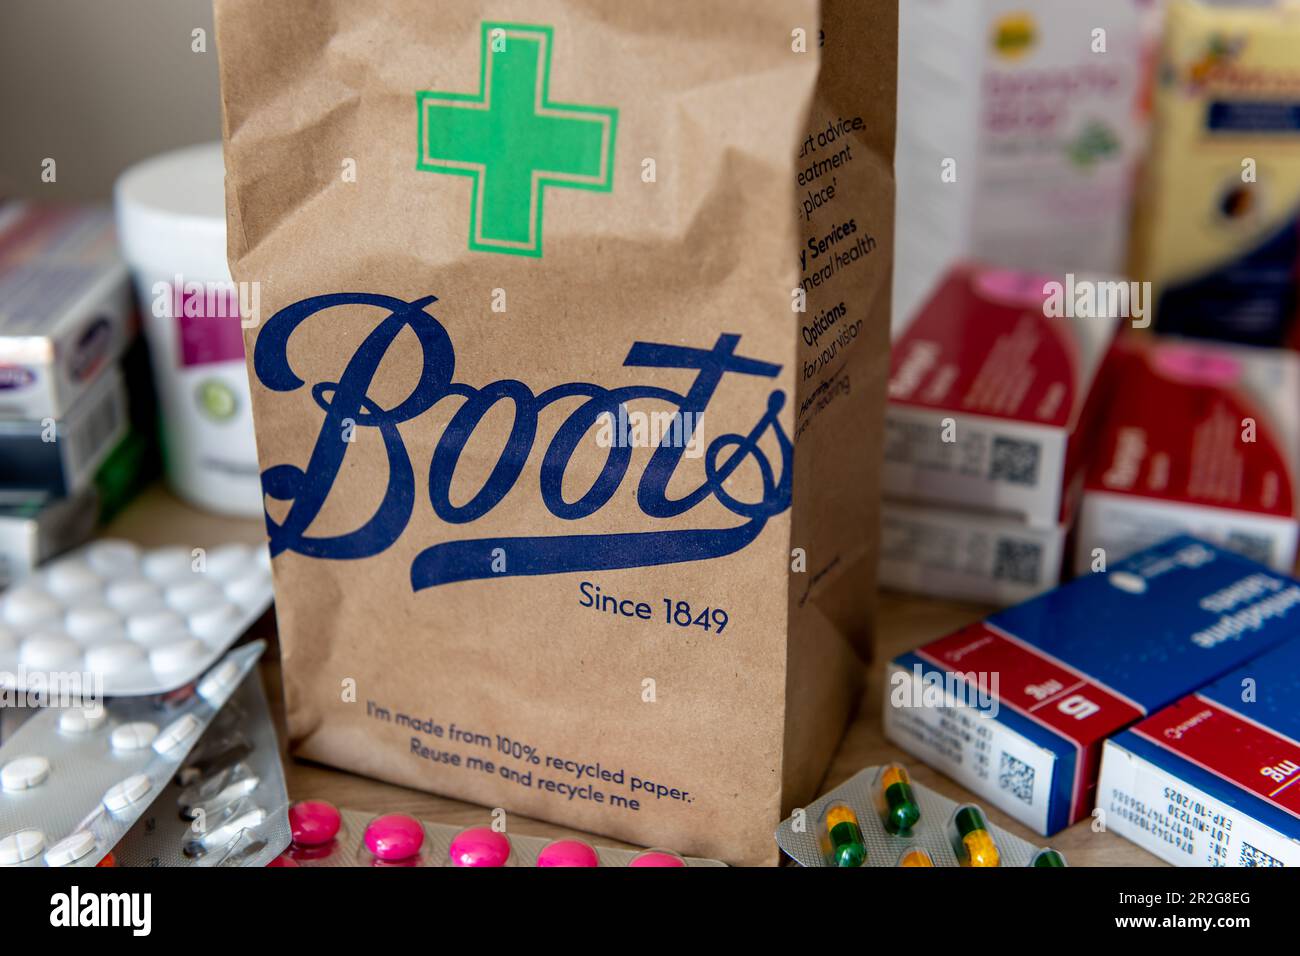 London. UK- 05.14.2023. A brown paper bag from the pharmacy and beauty retailer Boots with the company name and pharmacy symbol printed in front. Stock Photo